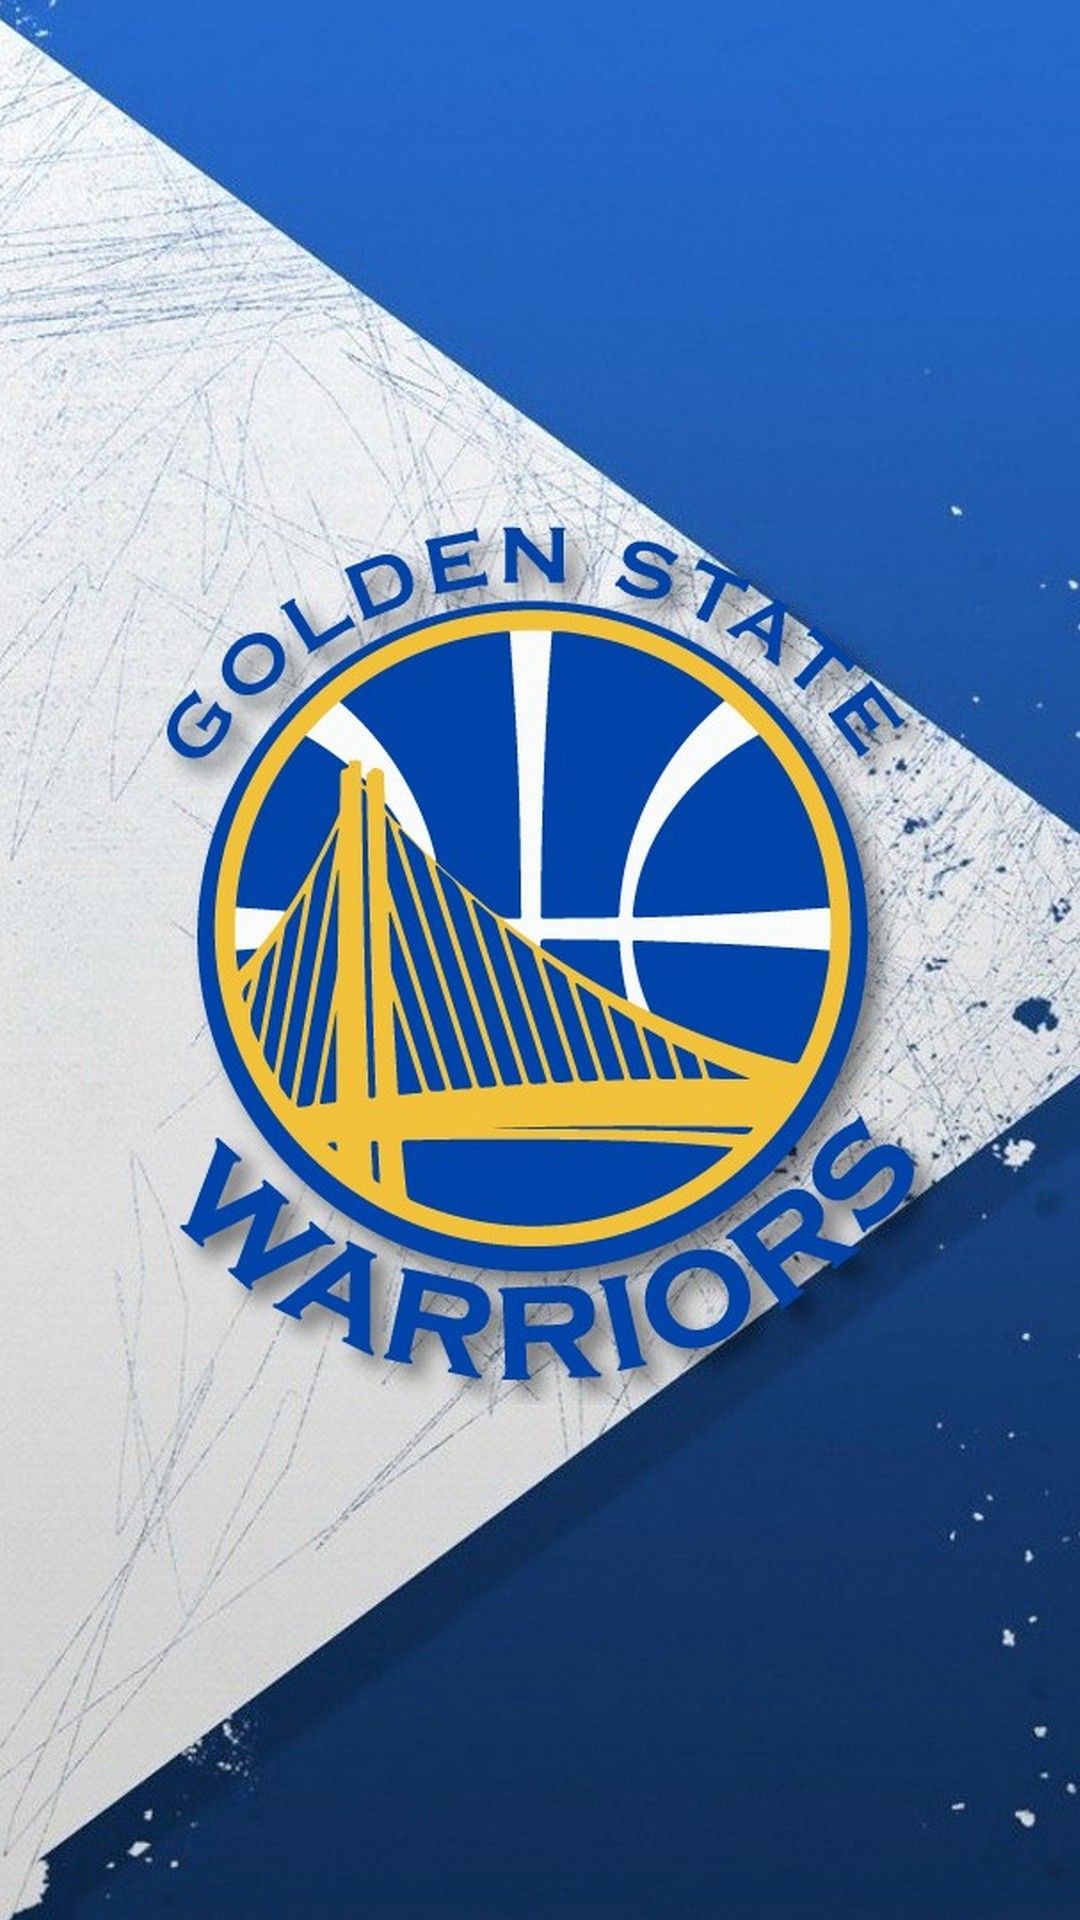 1080x1920 Wallpaper iPhone Golden State Warriors with image resolution   pixel. You can make this wallpaper